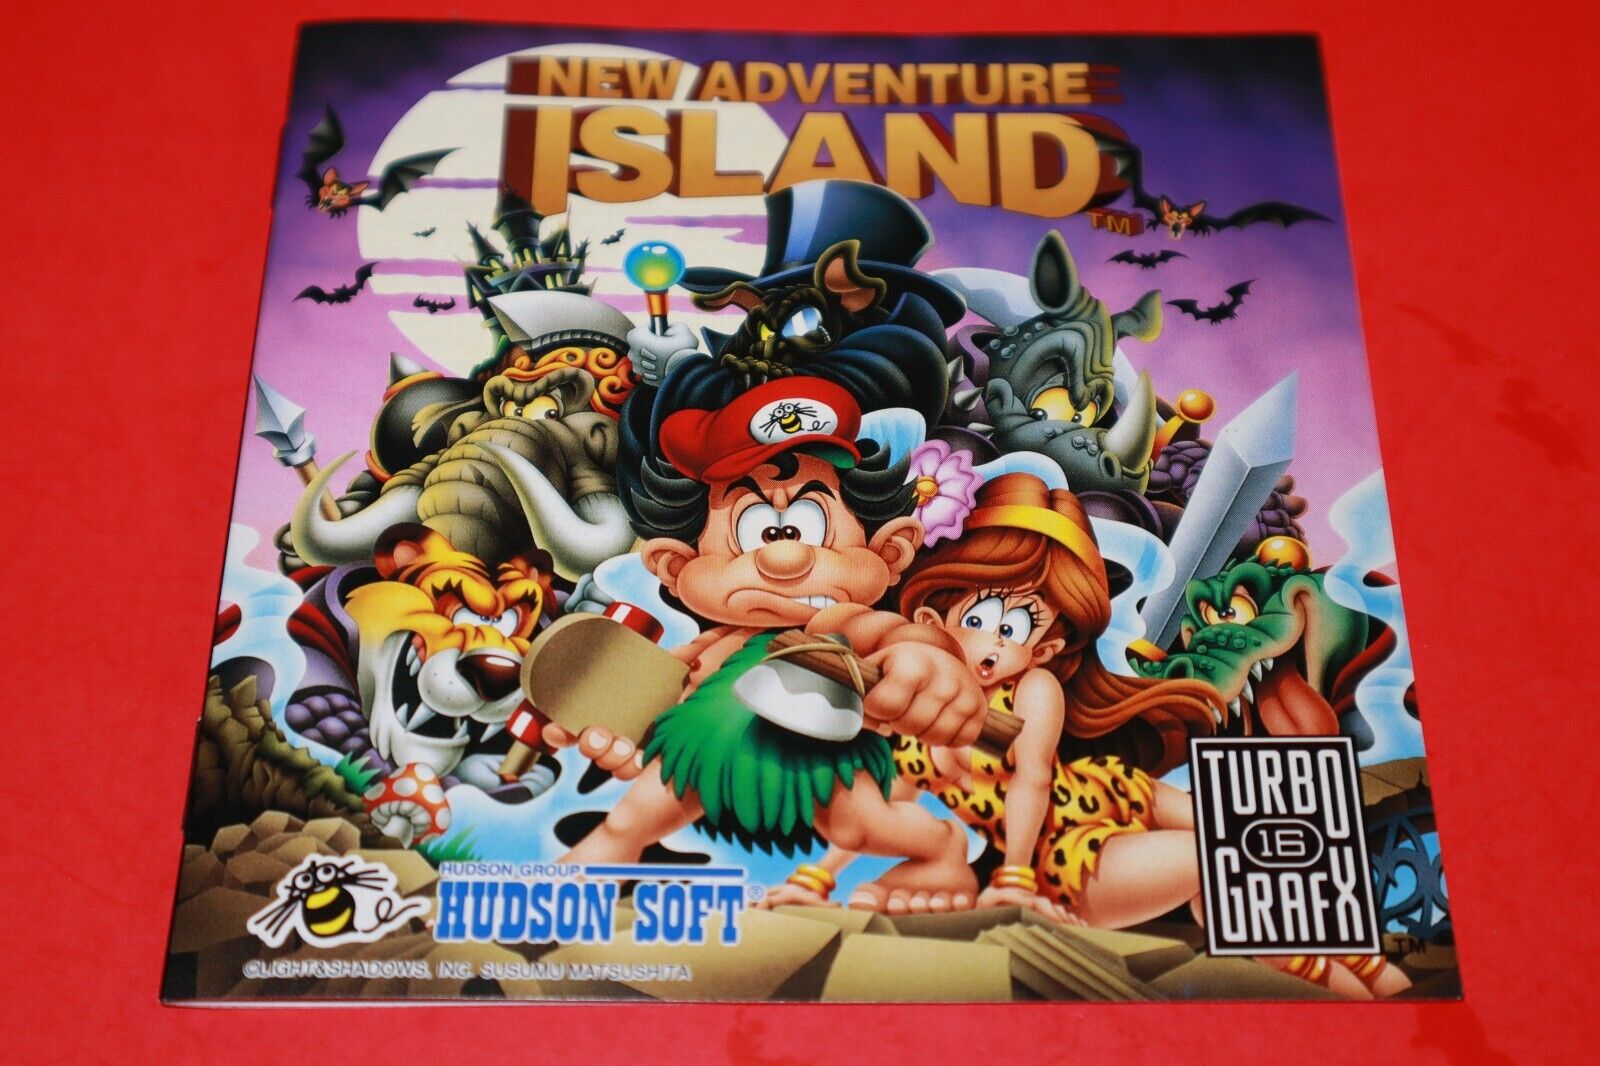 NEW ADVENTURE ISLAND FOR TURBOGRAFX 16 TG-16 COMPLETE & TESTED!